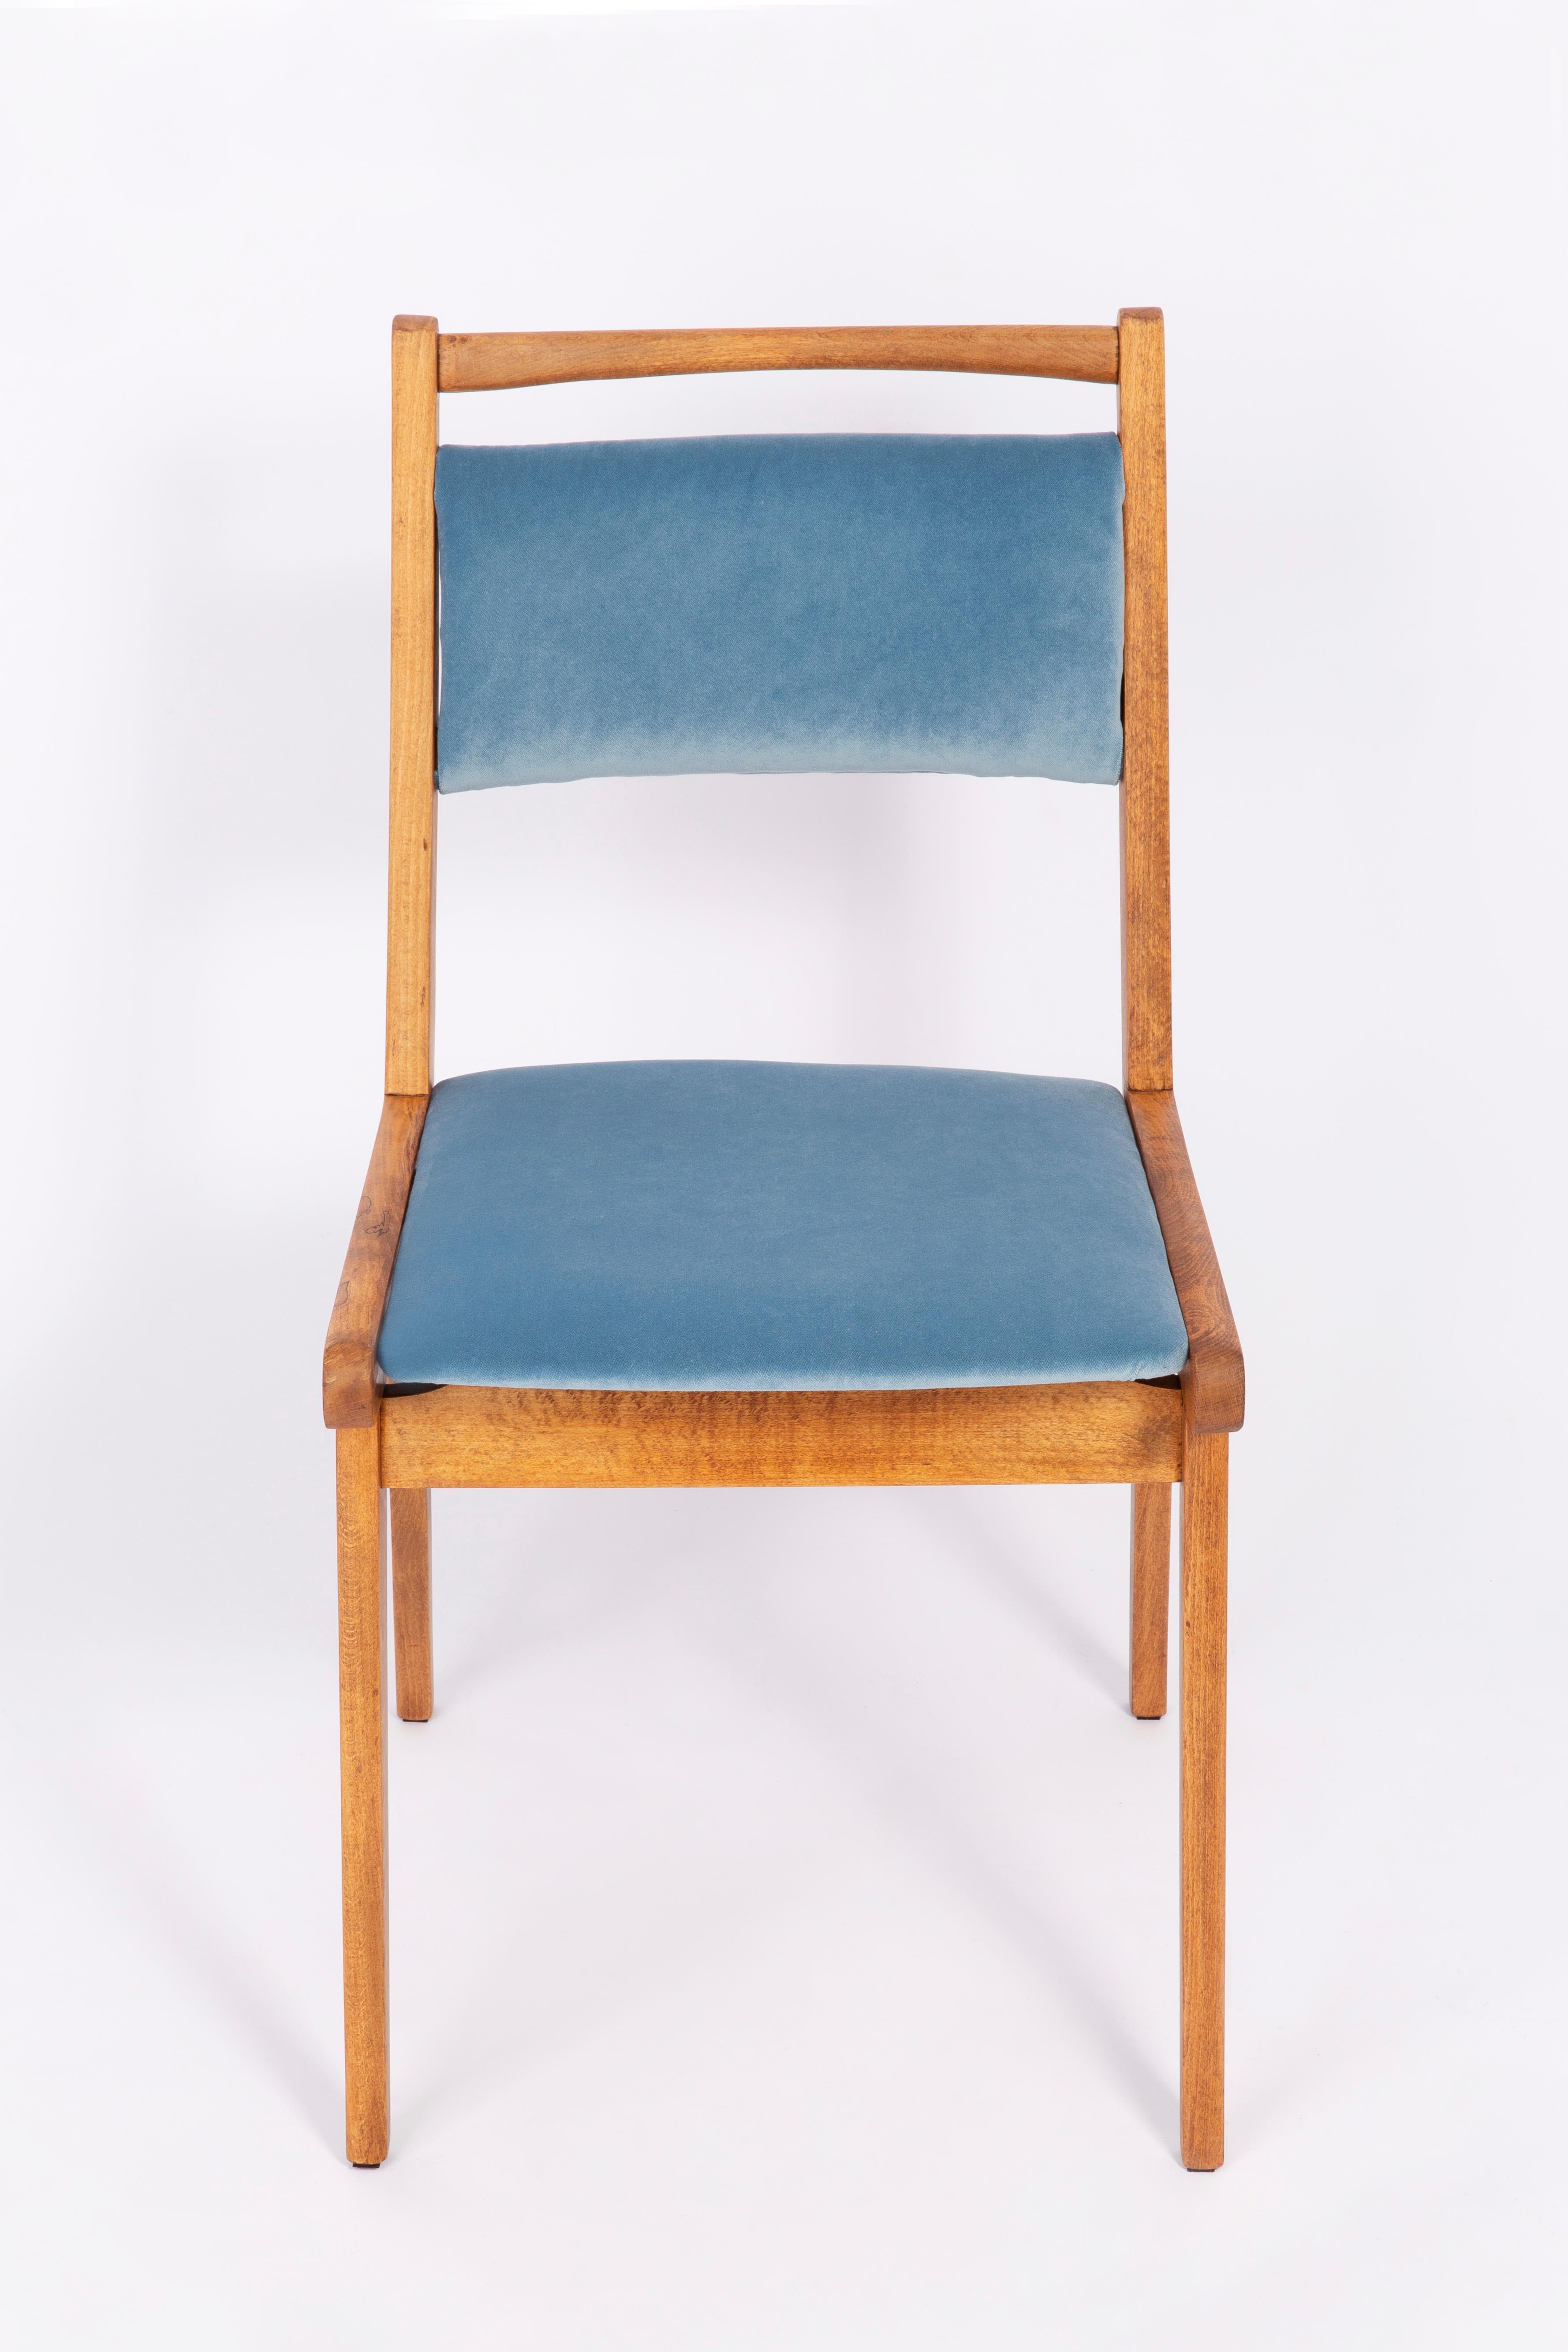 Set of Four 20th Century Blue Velvet Chairs, Poland, 1960s For Sale 1